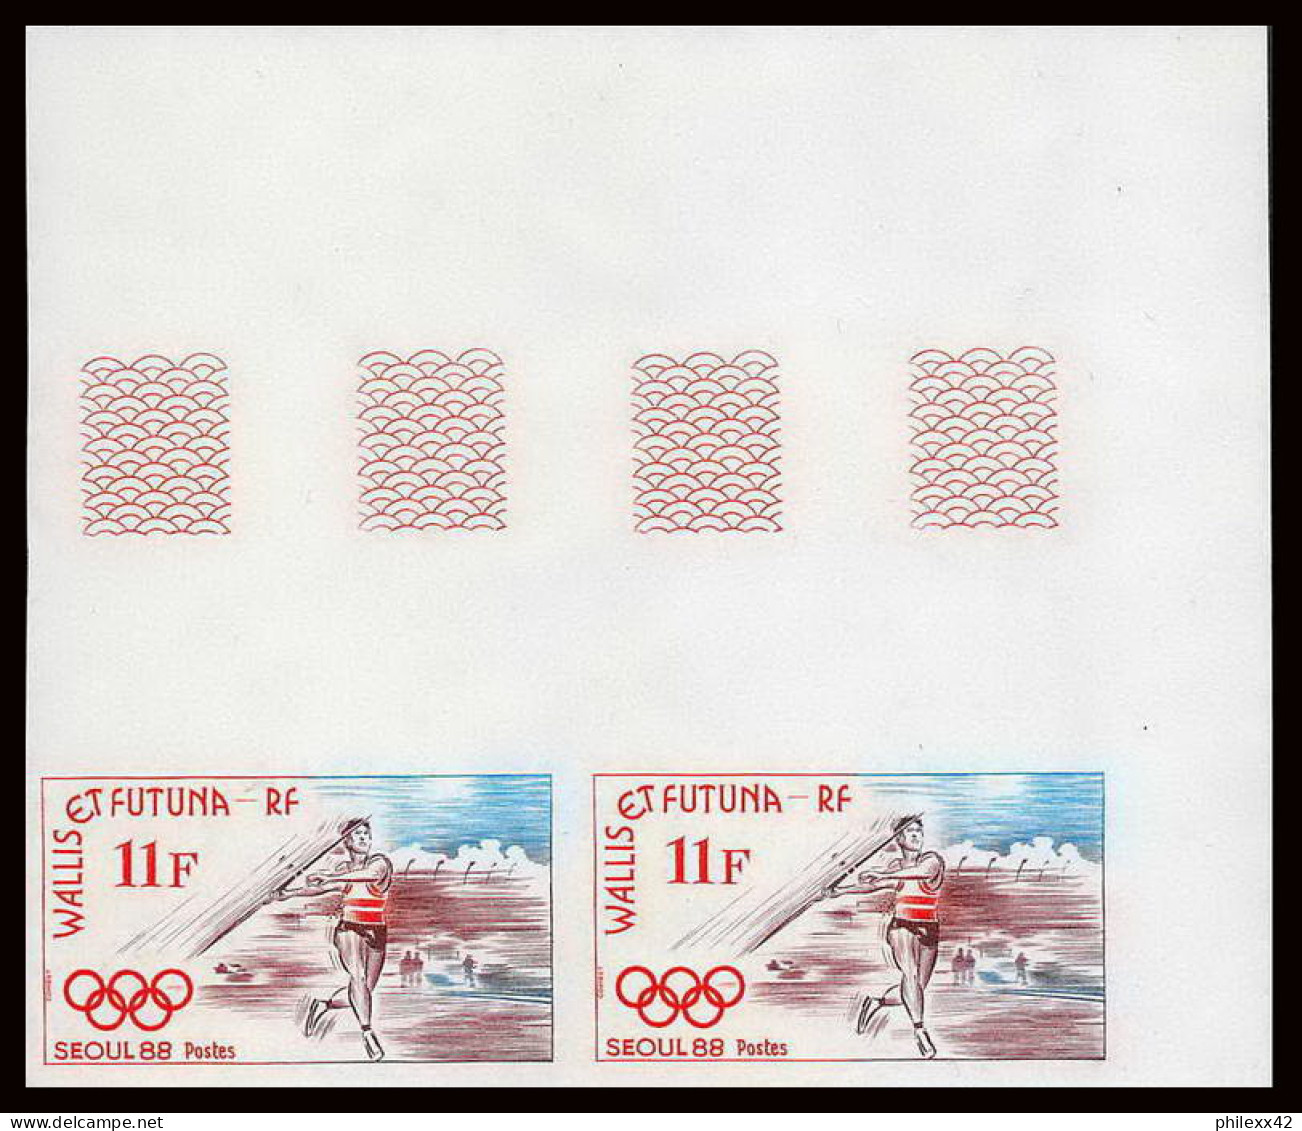 92547 Wallis Et Futuna N°378 Seoul 88 Javelot Javelin Jeux Olympiques Olympic Games 1988 Bloc Non Dentelé ** MNH Imperf - Imperforates, Proofs & Errors